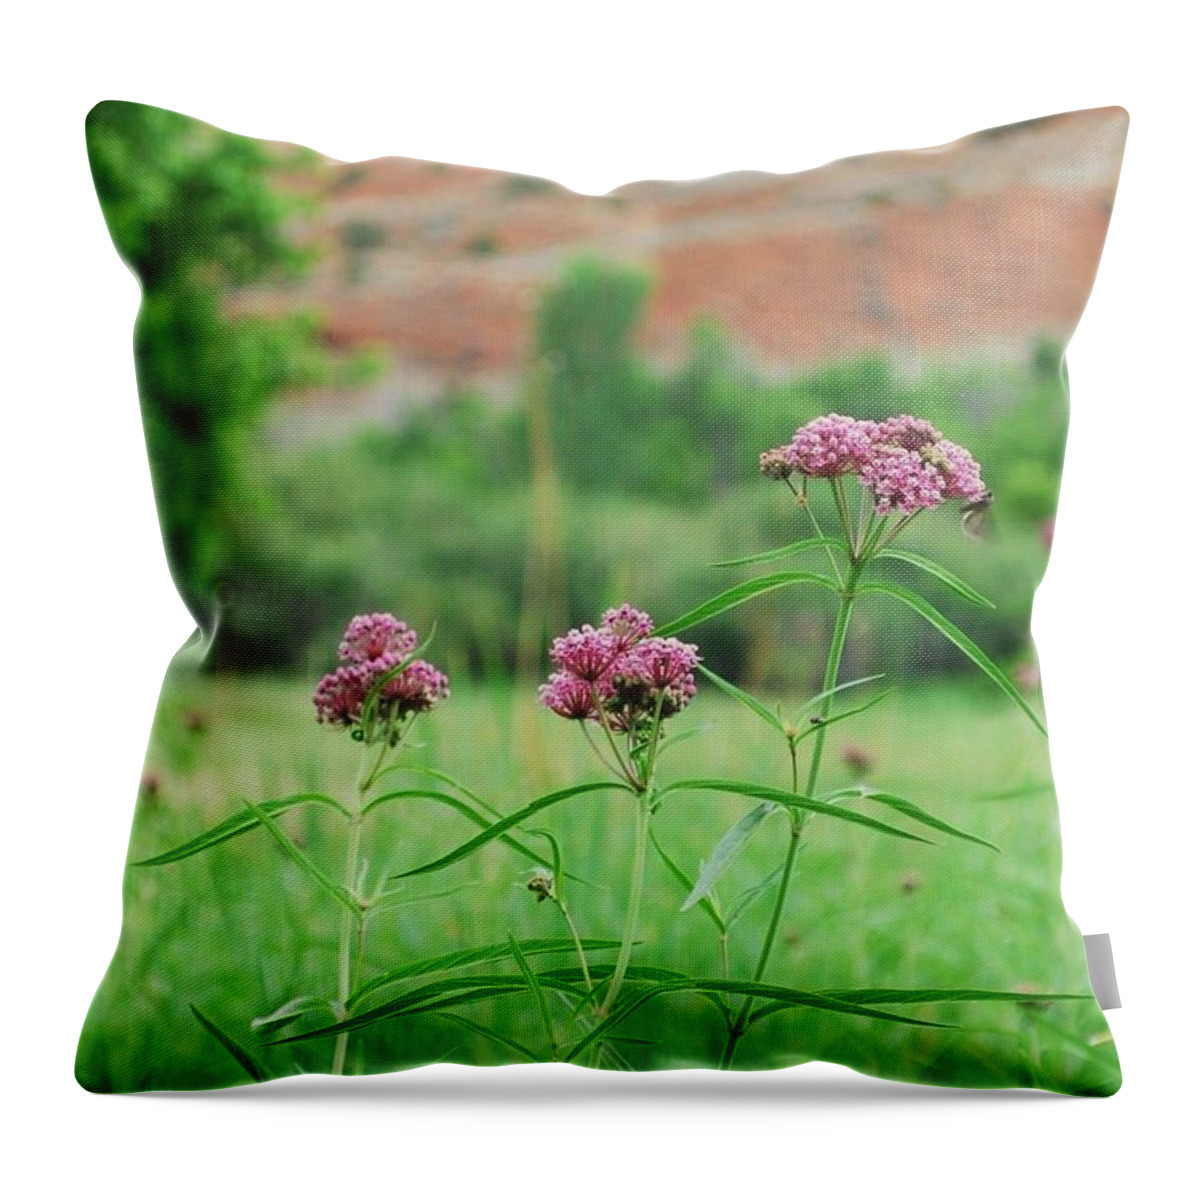 Dinosaur National Monument Throw Pillow featuring the photograph Heat Retreat by Brad Hodges